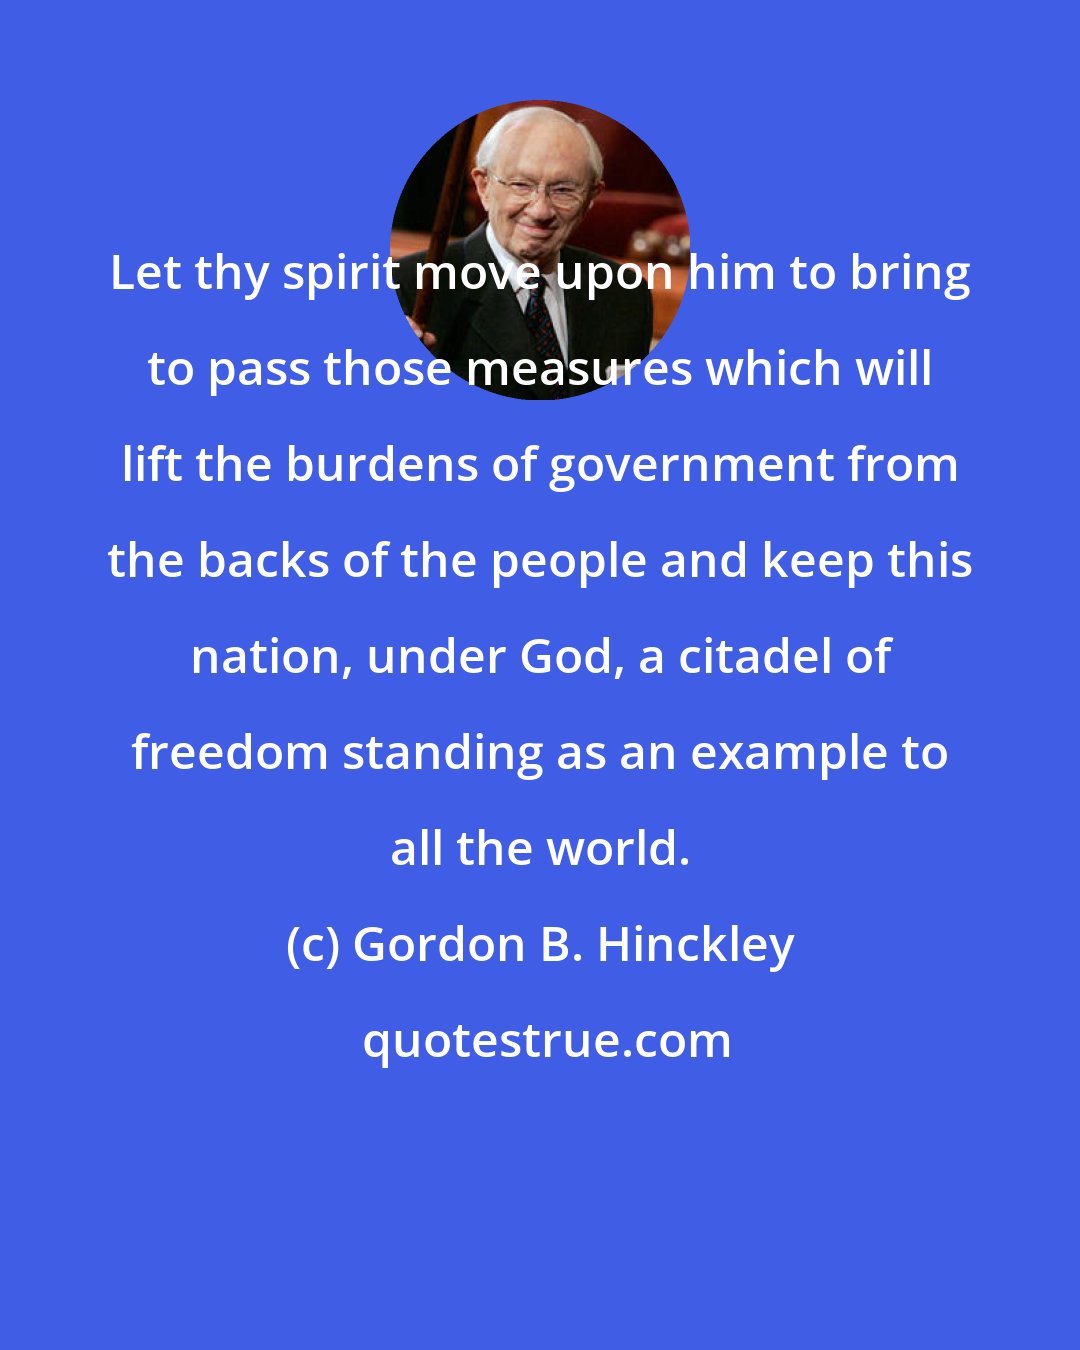 Gordon B. Hinckley: Let thy spirit move upon him to bring to pass those measures which will lift the burdens of government from the backs of the people and keep this nation, under God, a citadel of freedom standing as an example to all the world.